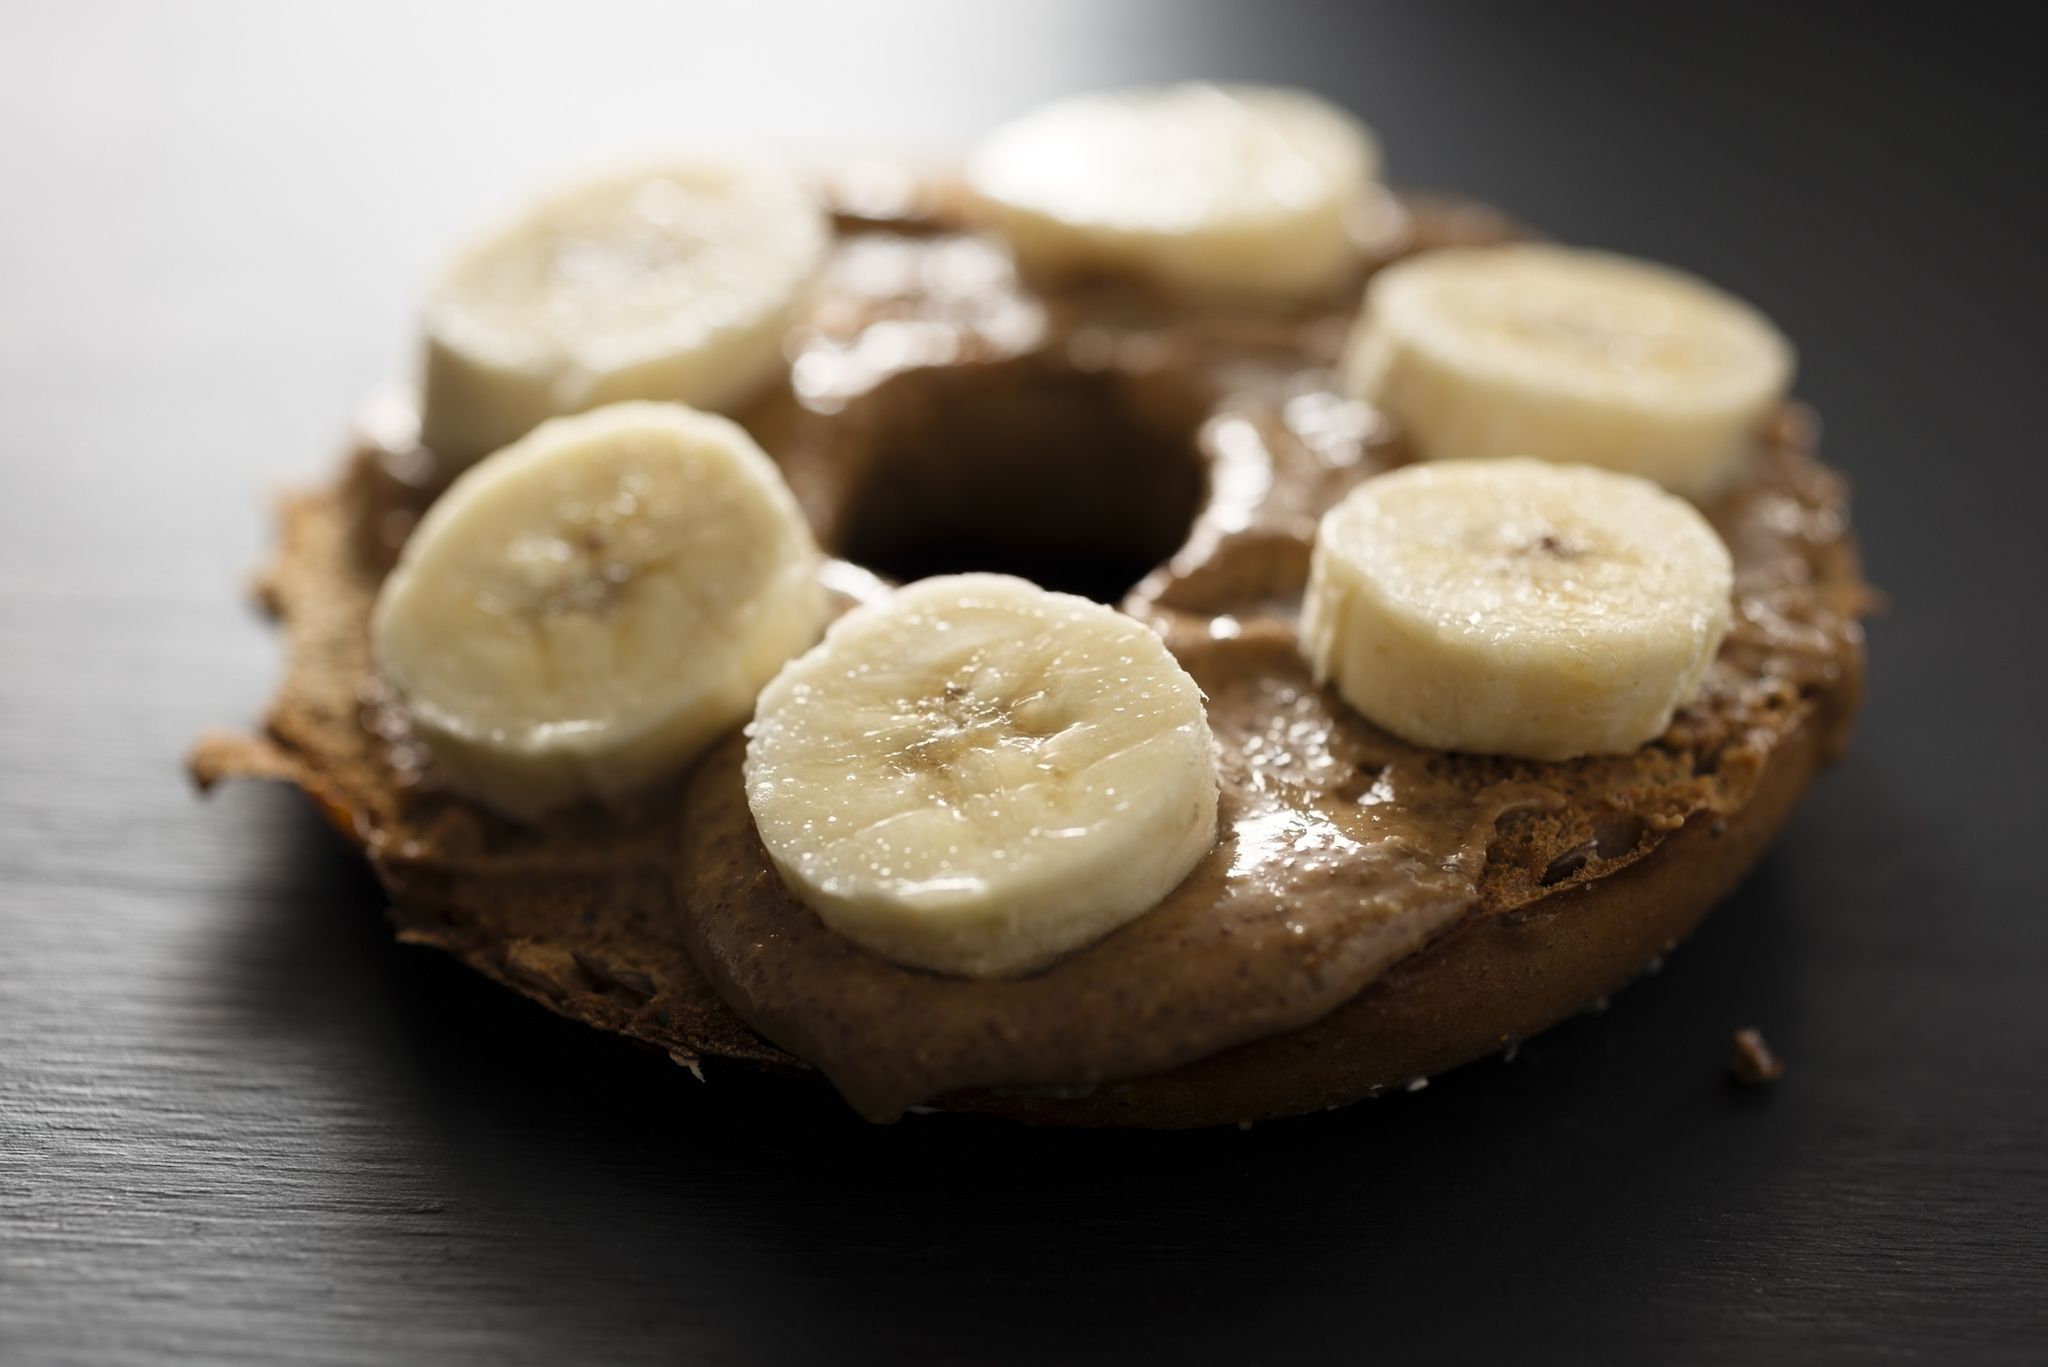 toasted bagel with almond butter spread and sliced banana, backlit with window light on a painted black chalkboard backdrop